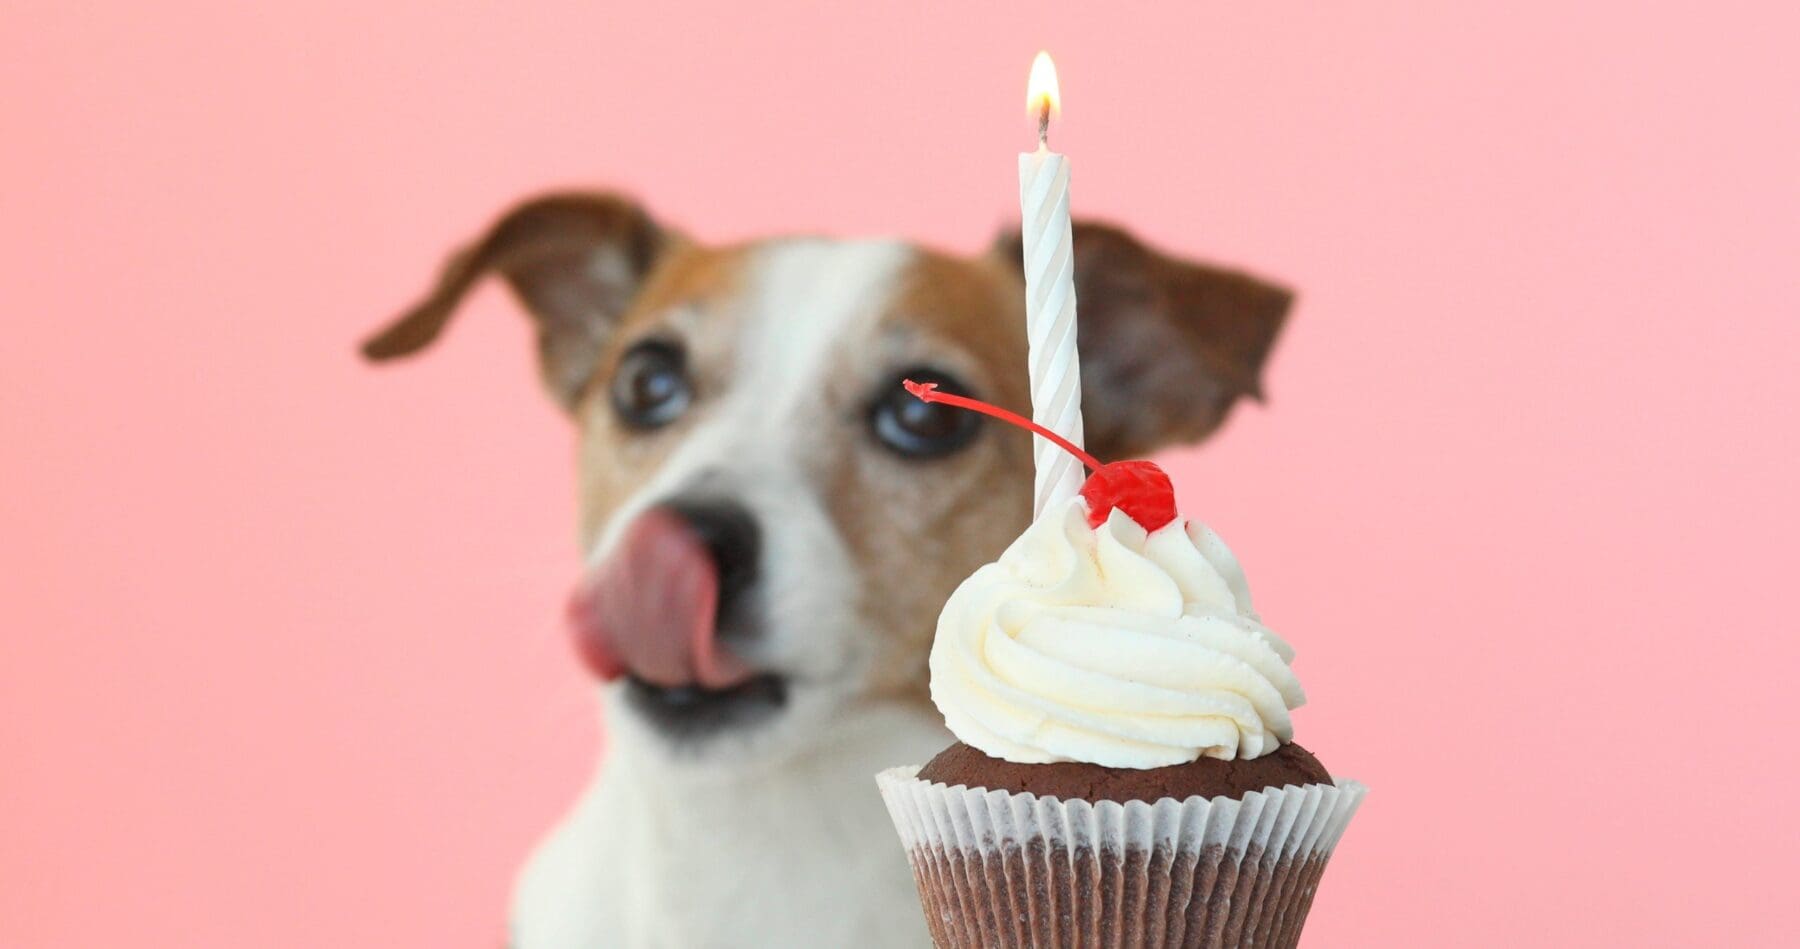 Jack Russel terrier licking his snout looking at a cupcake, in front of a pink background